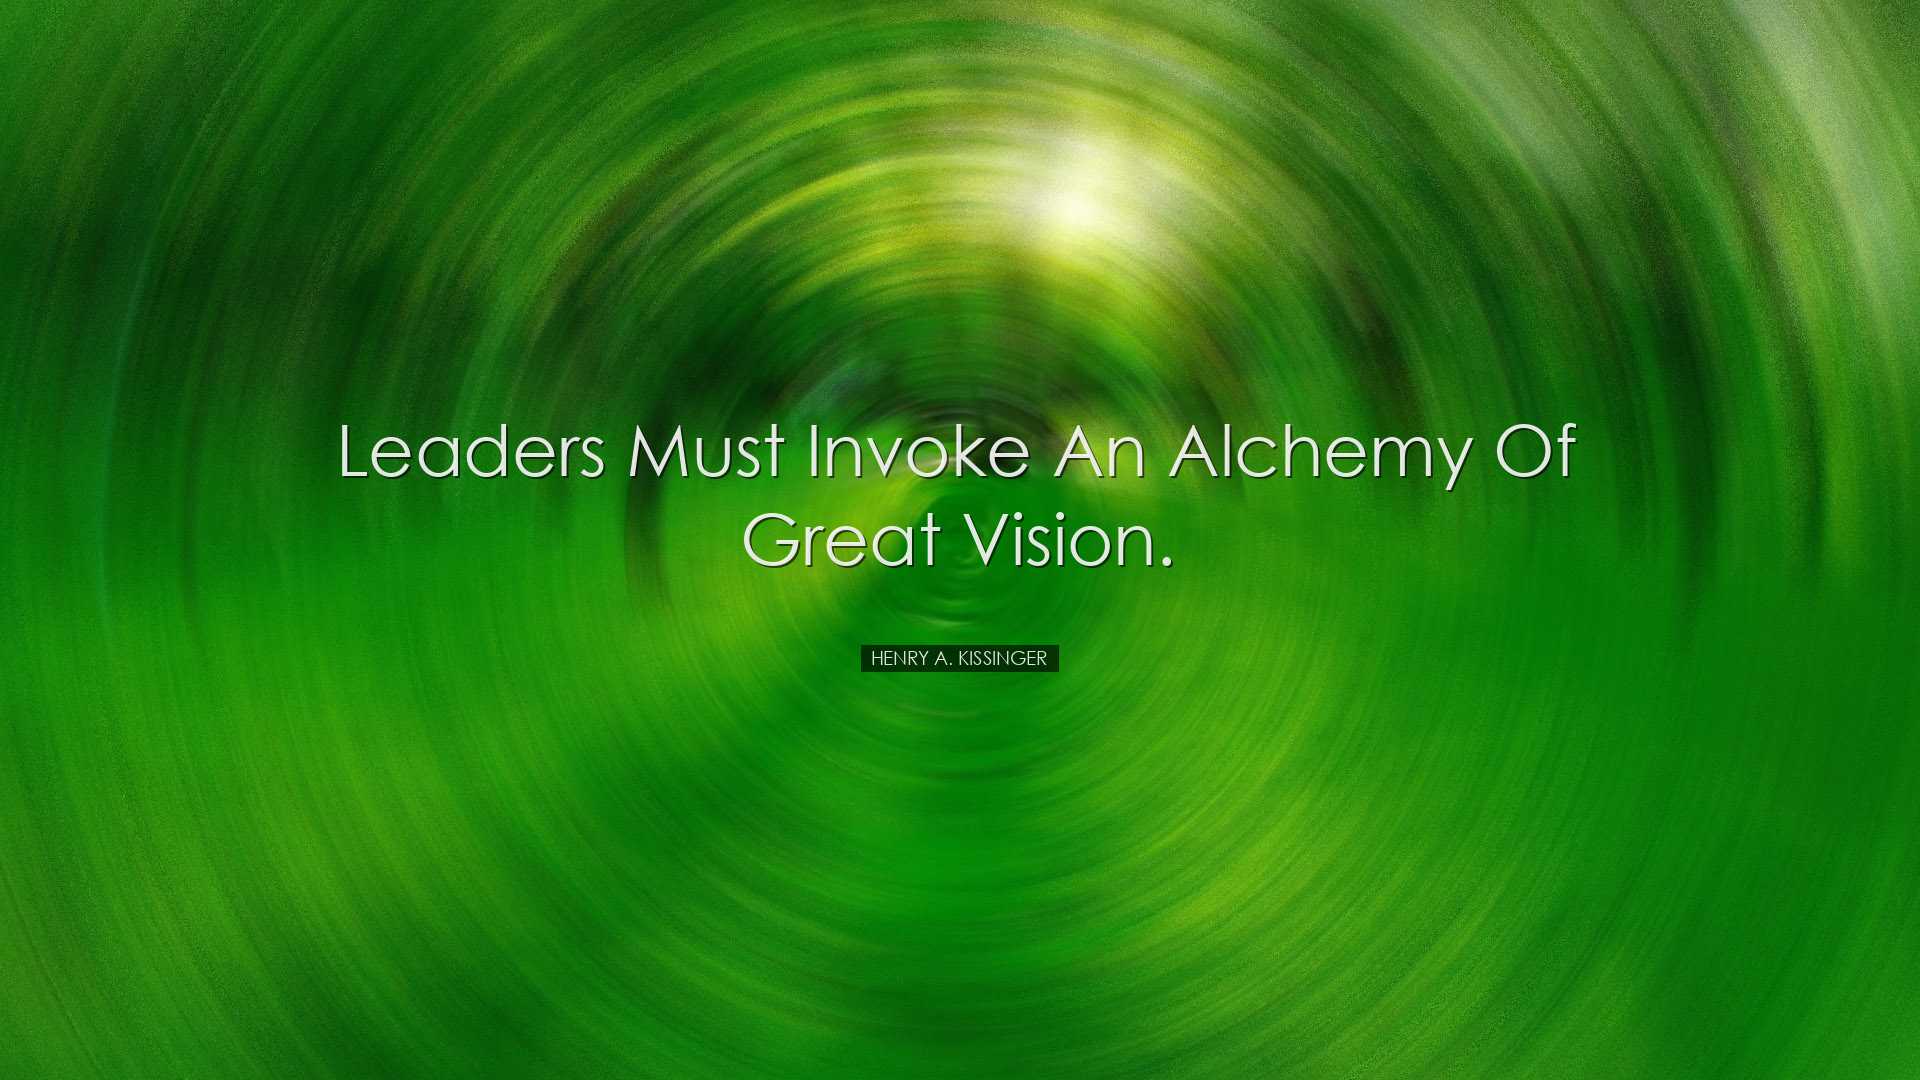 Leaders must invoke an alchemy of great vision. - Henry A. Kissing